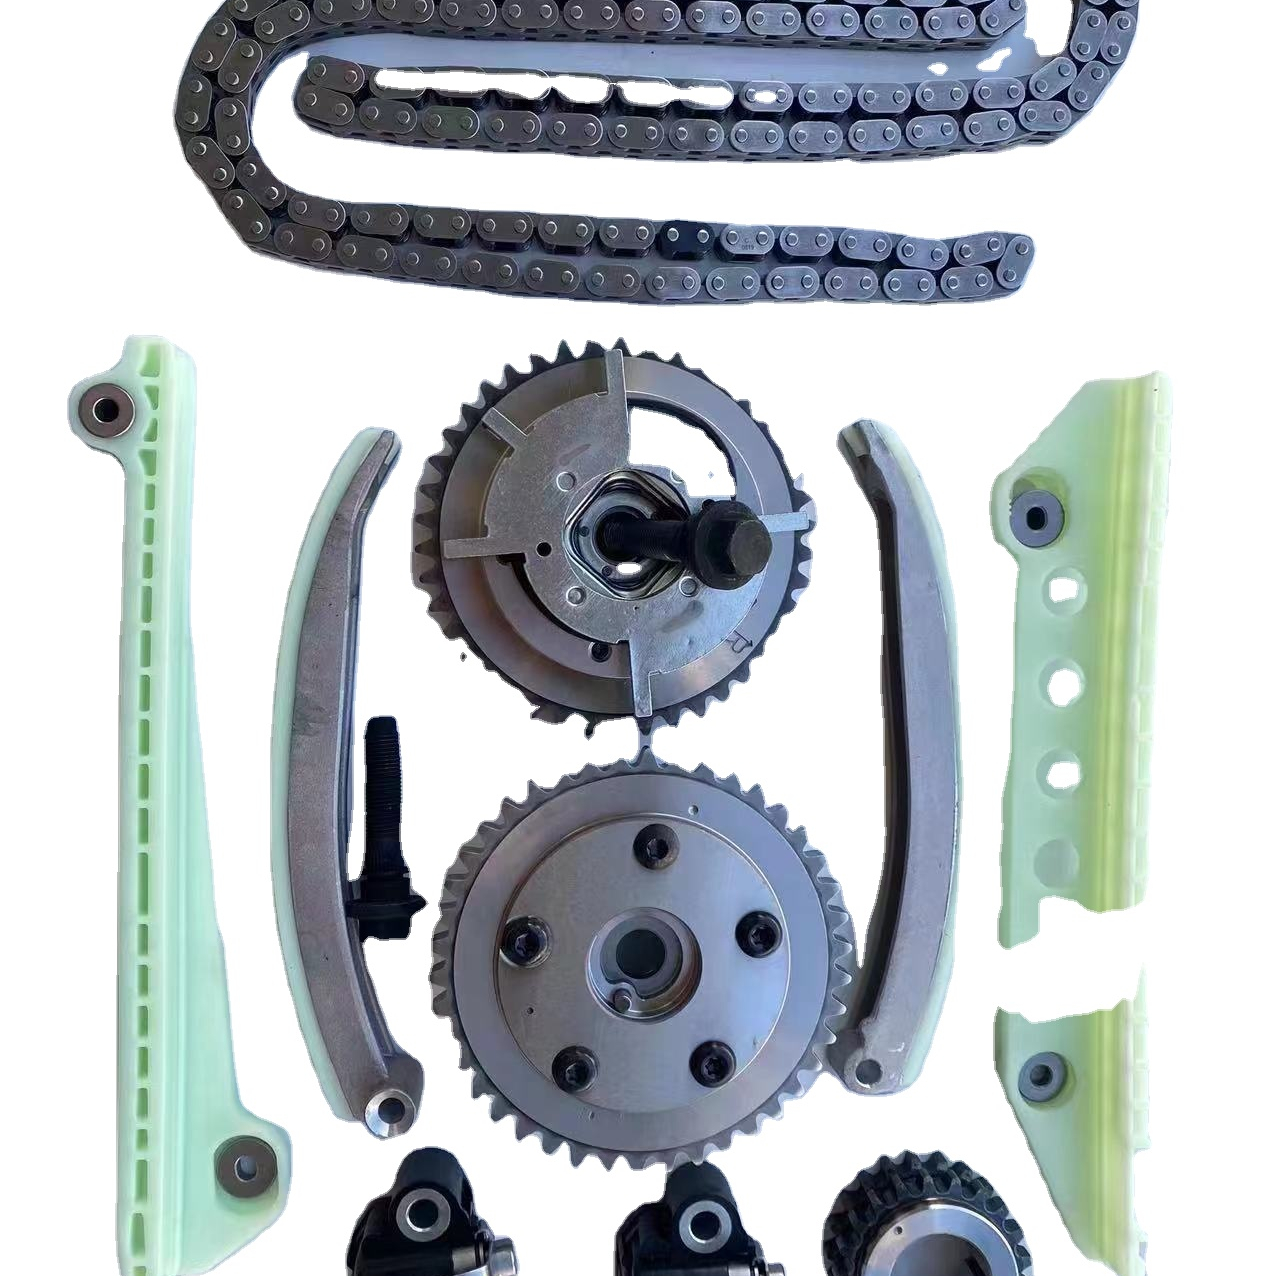 TIMING CHAIN KIT For Ford ranger 2.3 and mazda 6 2.explorer 4.6 Car Engine Parts For Sale